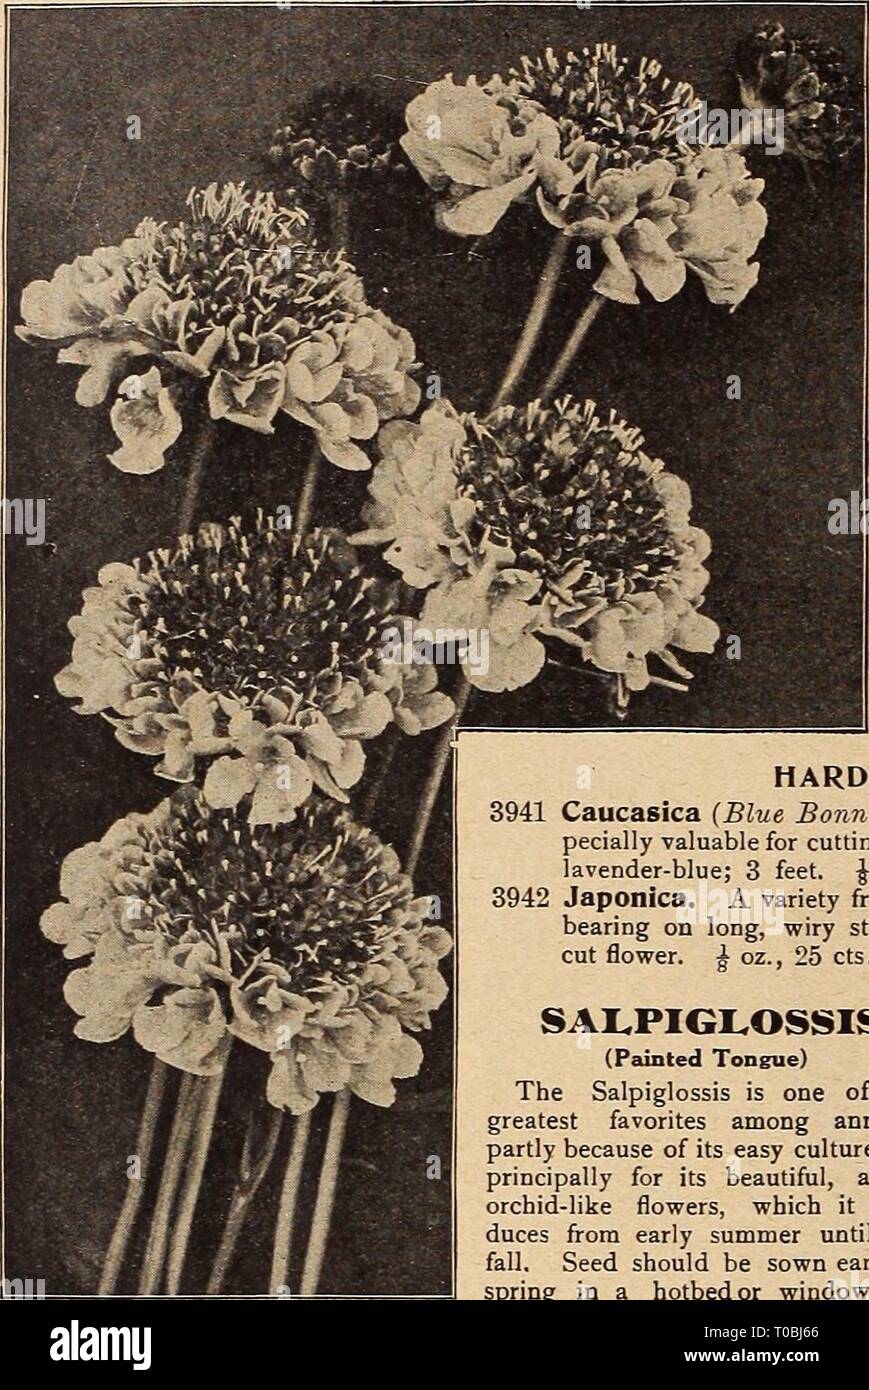 Dreer's garden book 1919 (1919) Dreer's garden book 1919 dreersgardenbook1919henr Year: 1919  108 [lllIUBIRTADRaR-PHIlADELPHIAfA- RELIABLE FLOWER SEEDS    Improved Large-flowbking Scabiosa SCABIOSA (Mourning Bride, Sweet Scabious, Pin-cushion Flower, etc.) The Annual Scabiosas are firm favorites with many of our customers. Seed can be sown any time in the spring after danger of frost is past. They grow about 2^ feet high, and come into bloom early in July, and continue without interruption until hard frost. The beautiful flowers in exquisite shades are borne on long stems, and when cut keep in Stock Photo